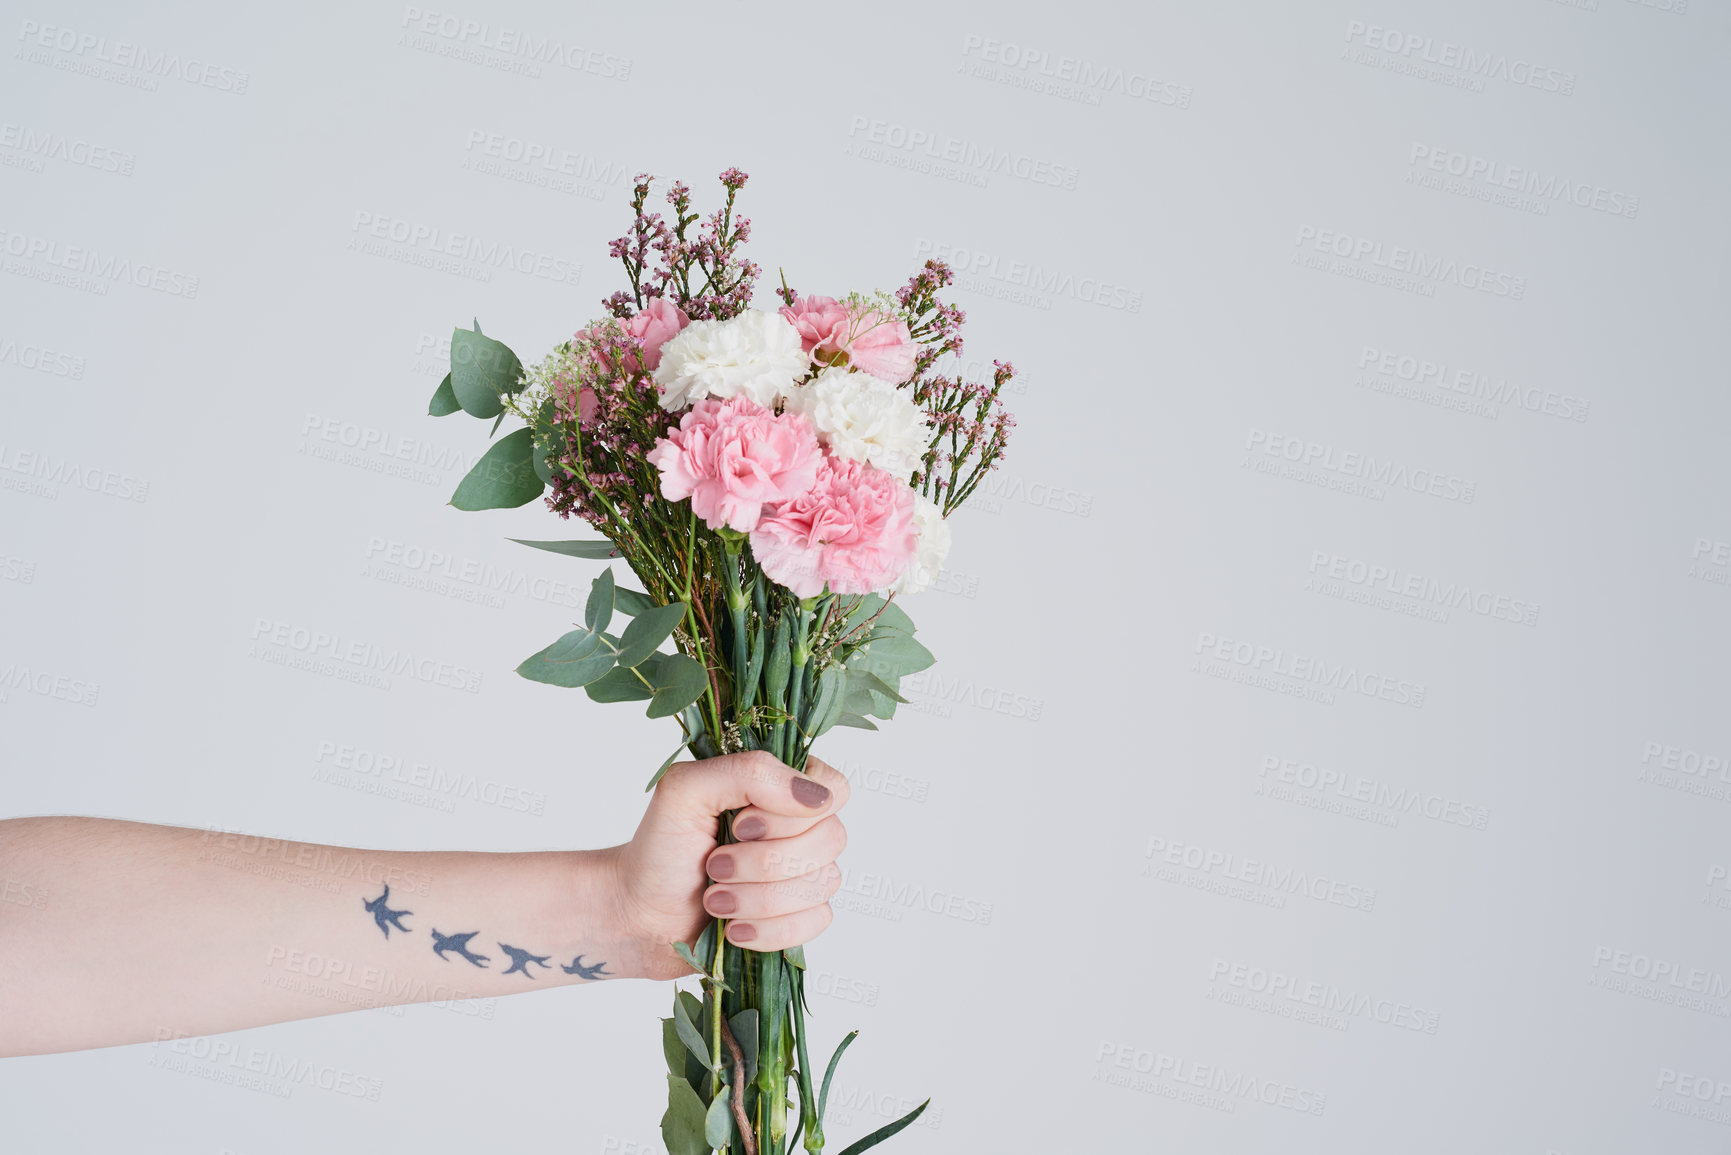 Buy stock photo Studio shot of an unrecognizable woman holding a bouquet of flowers against a grey background